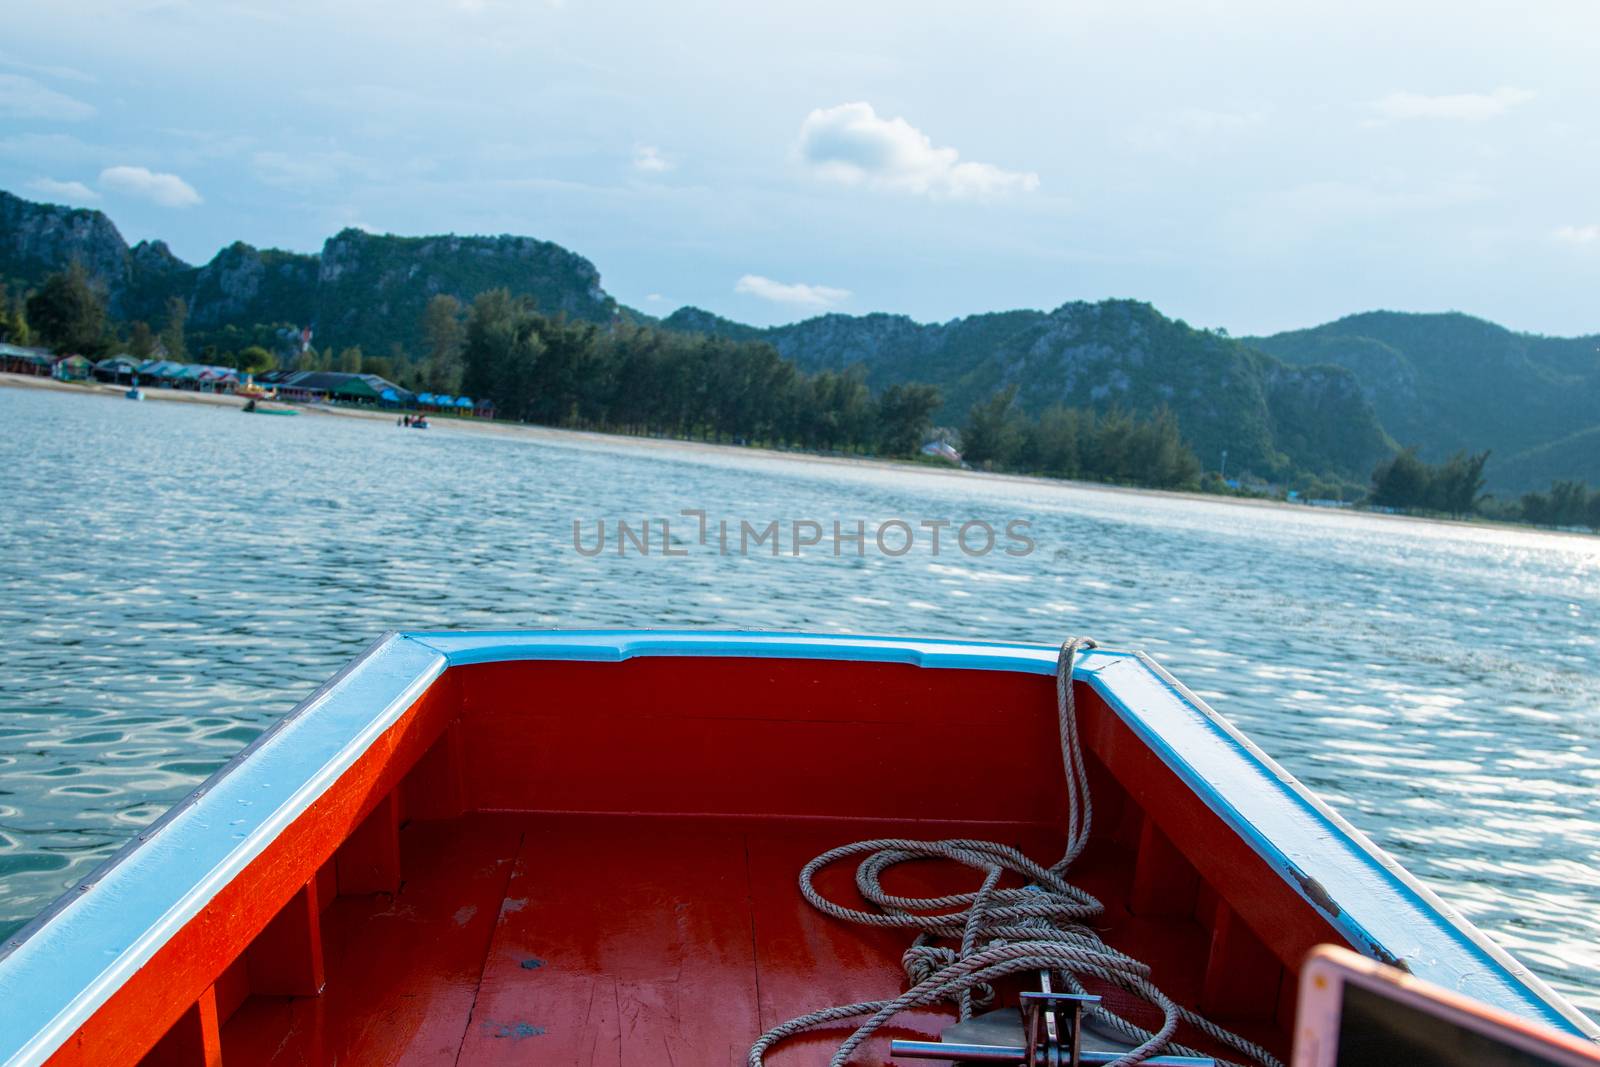 Thai fishing boat used as a vehicle for finding fish in the sea